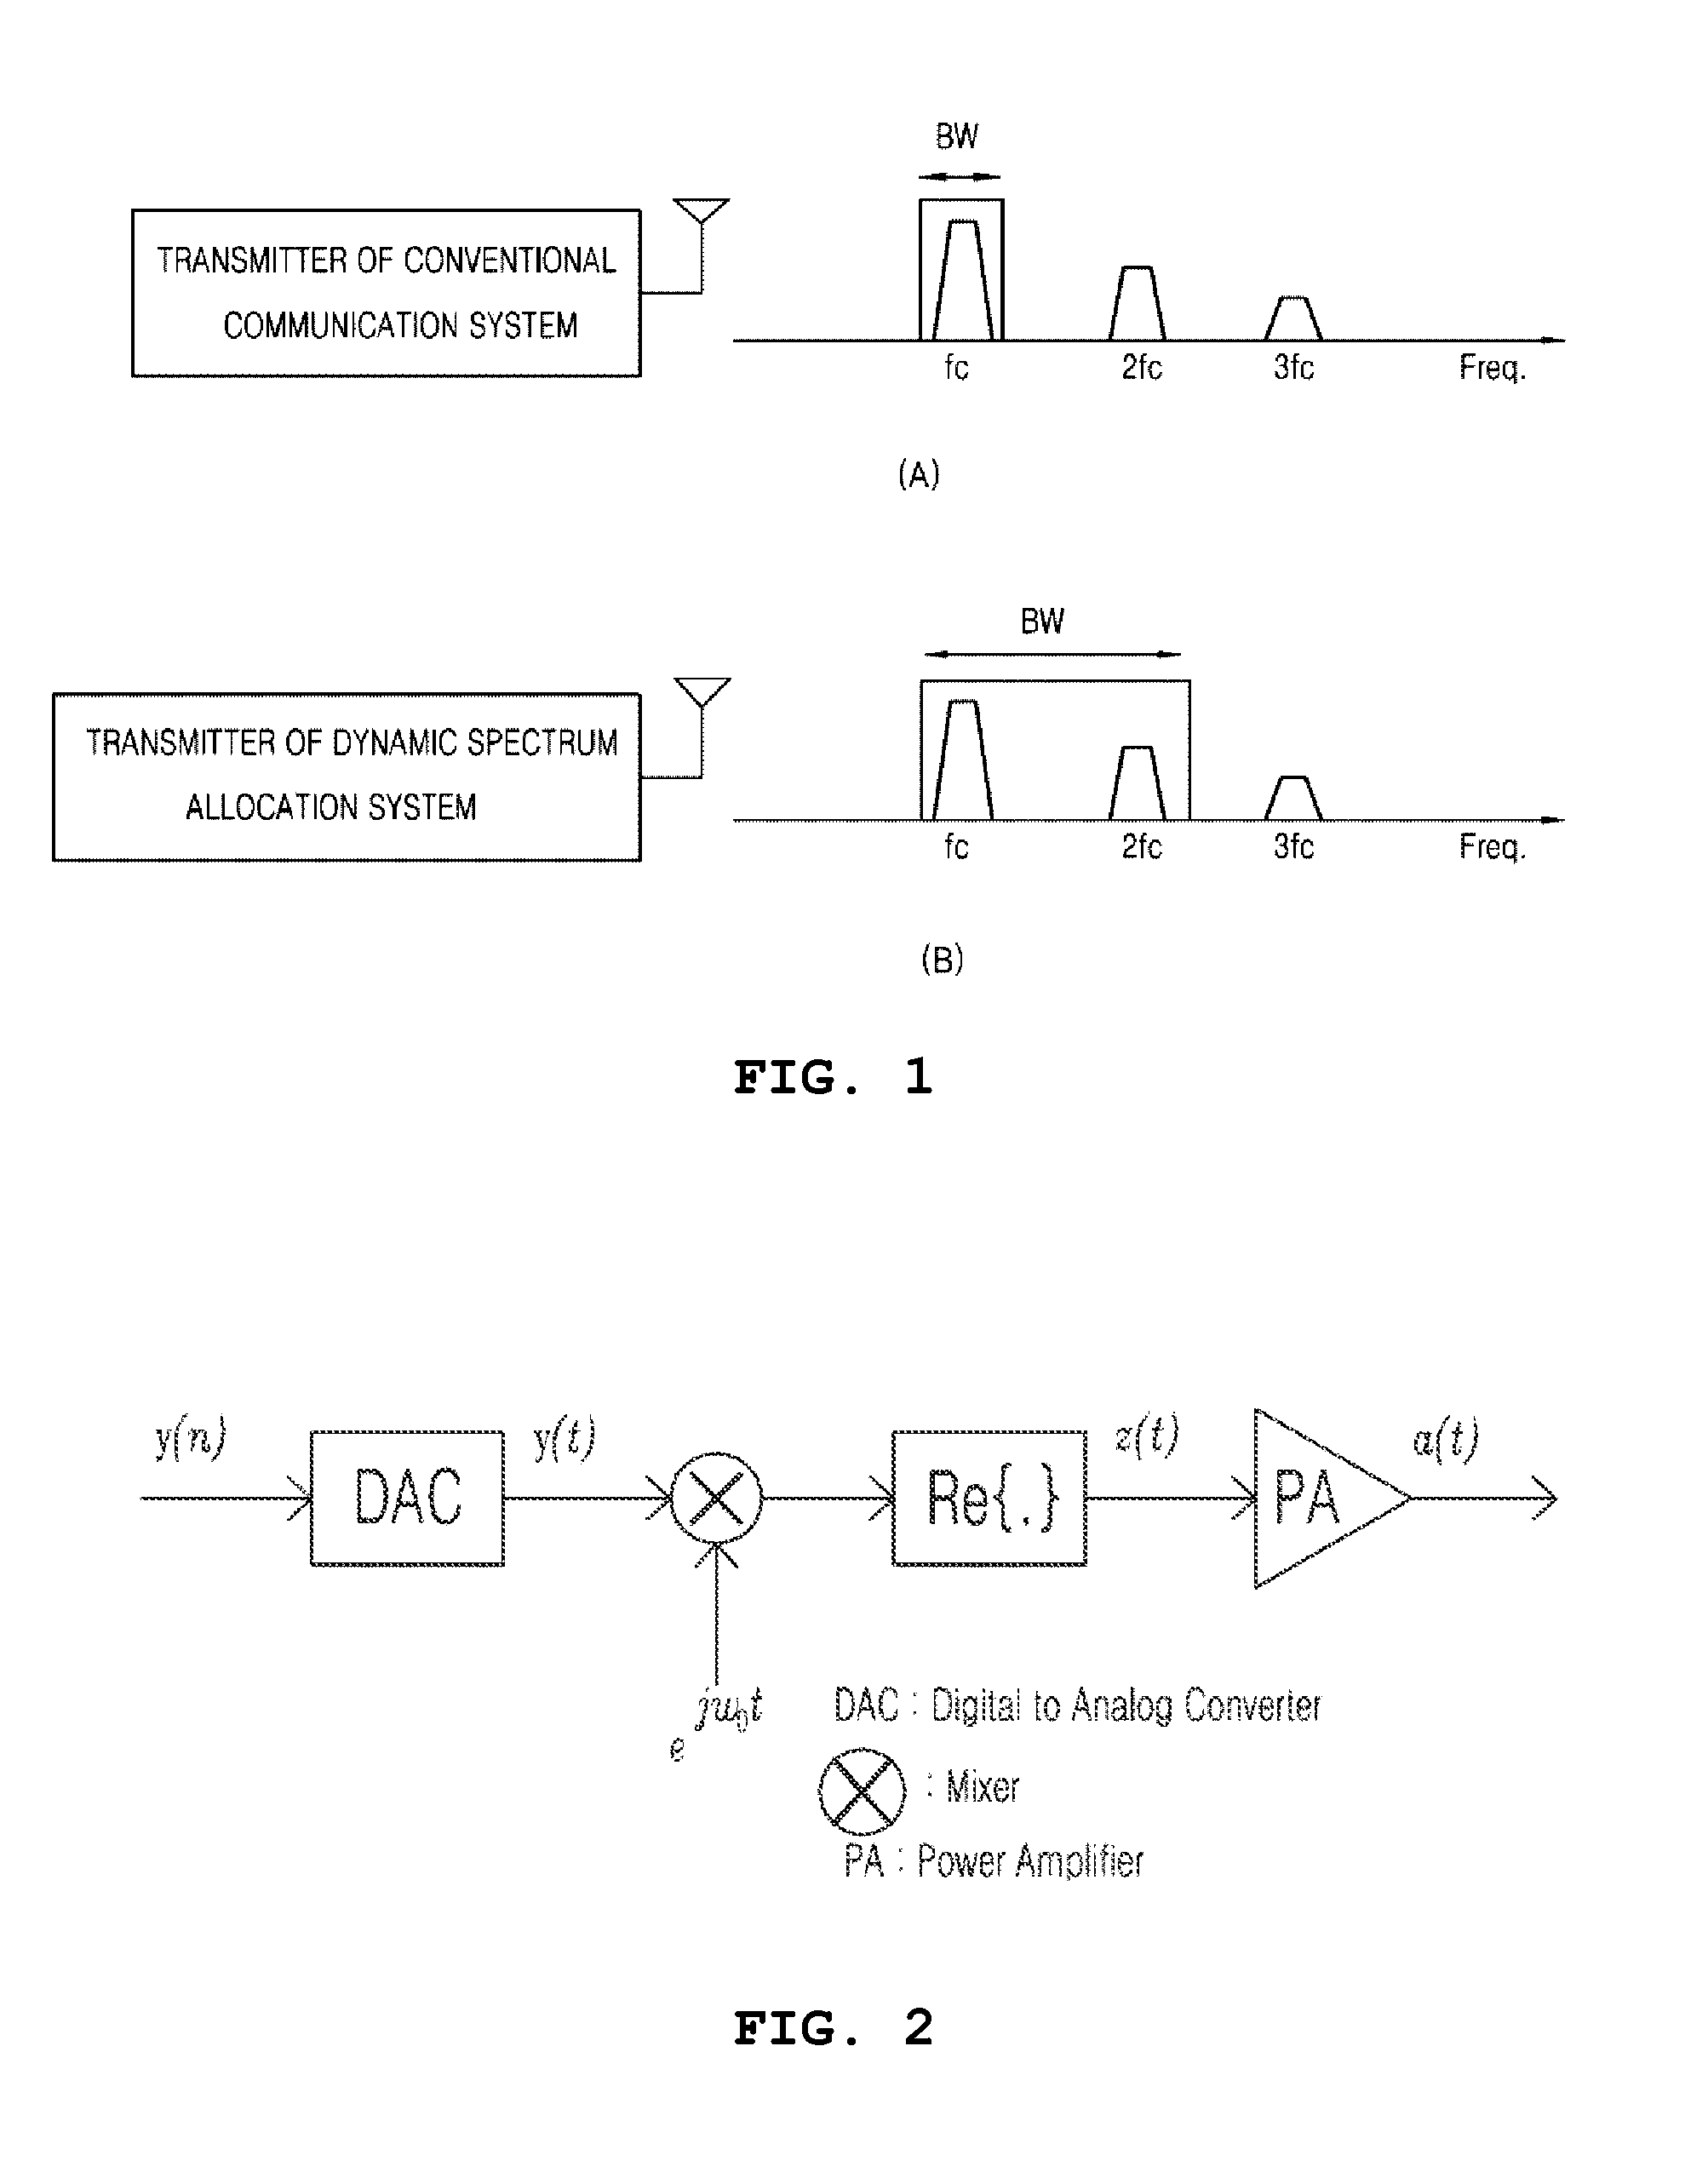 Digital pre-distortion device and method for a broadband power amplifier